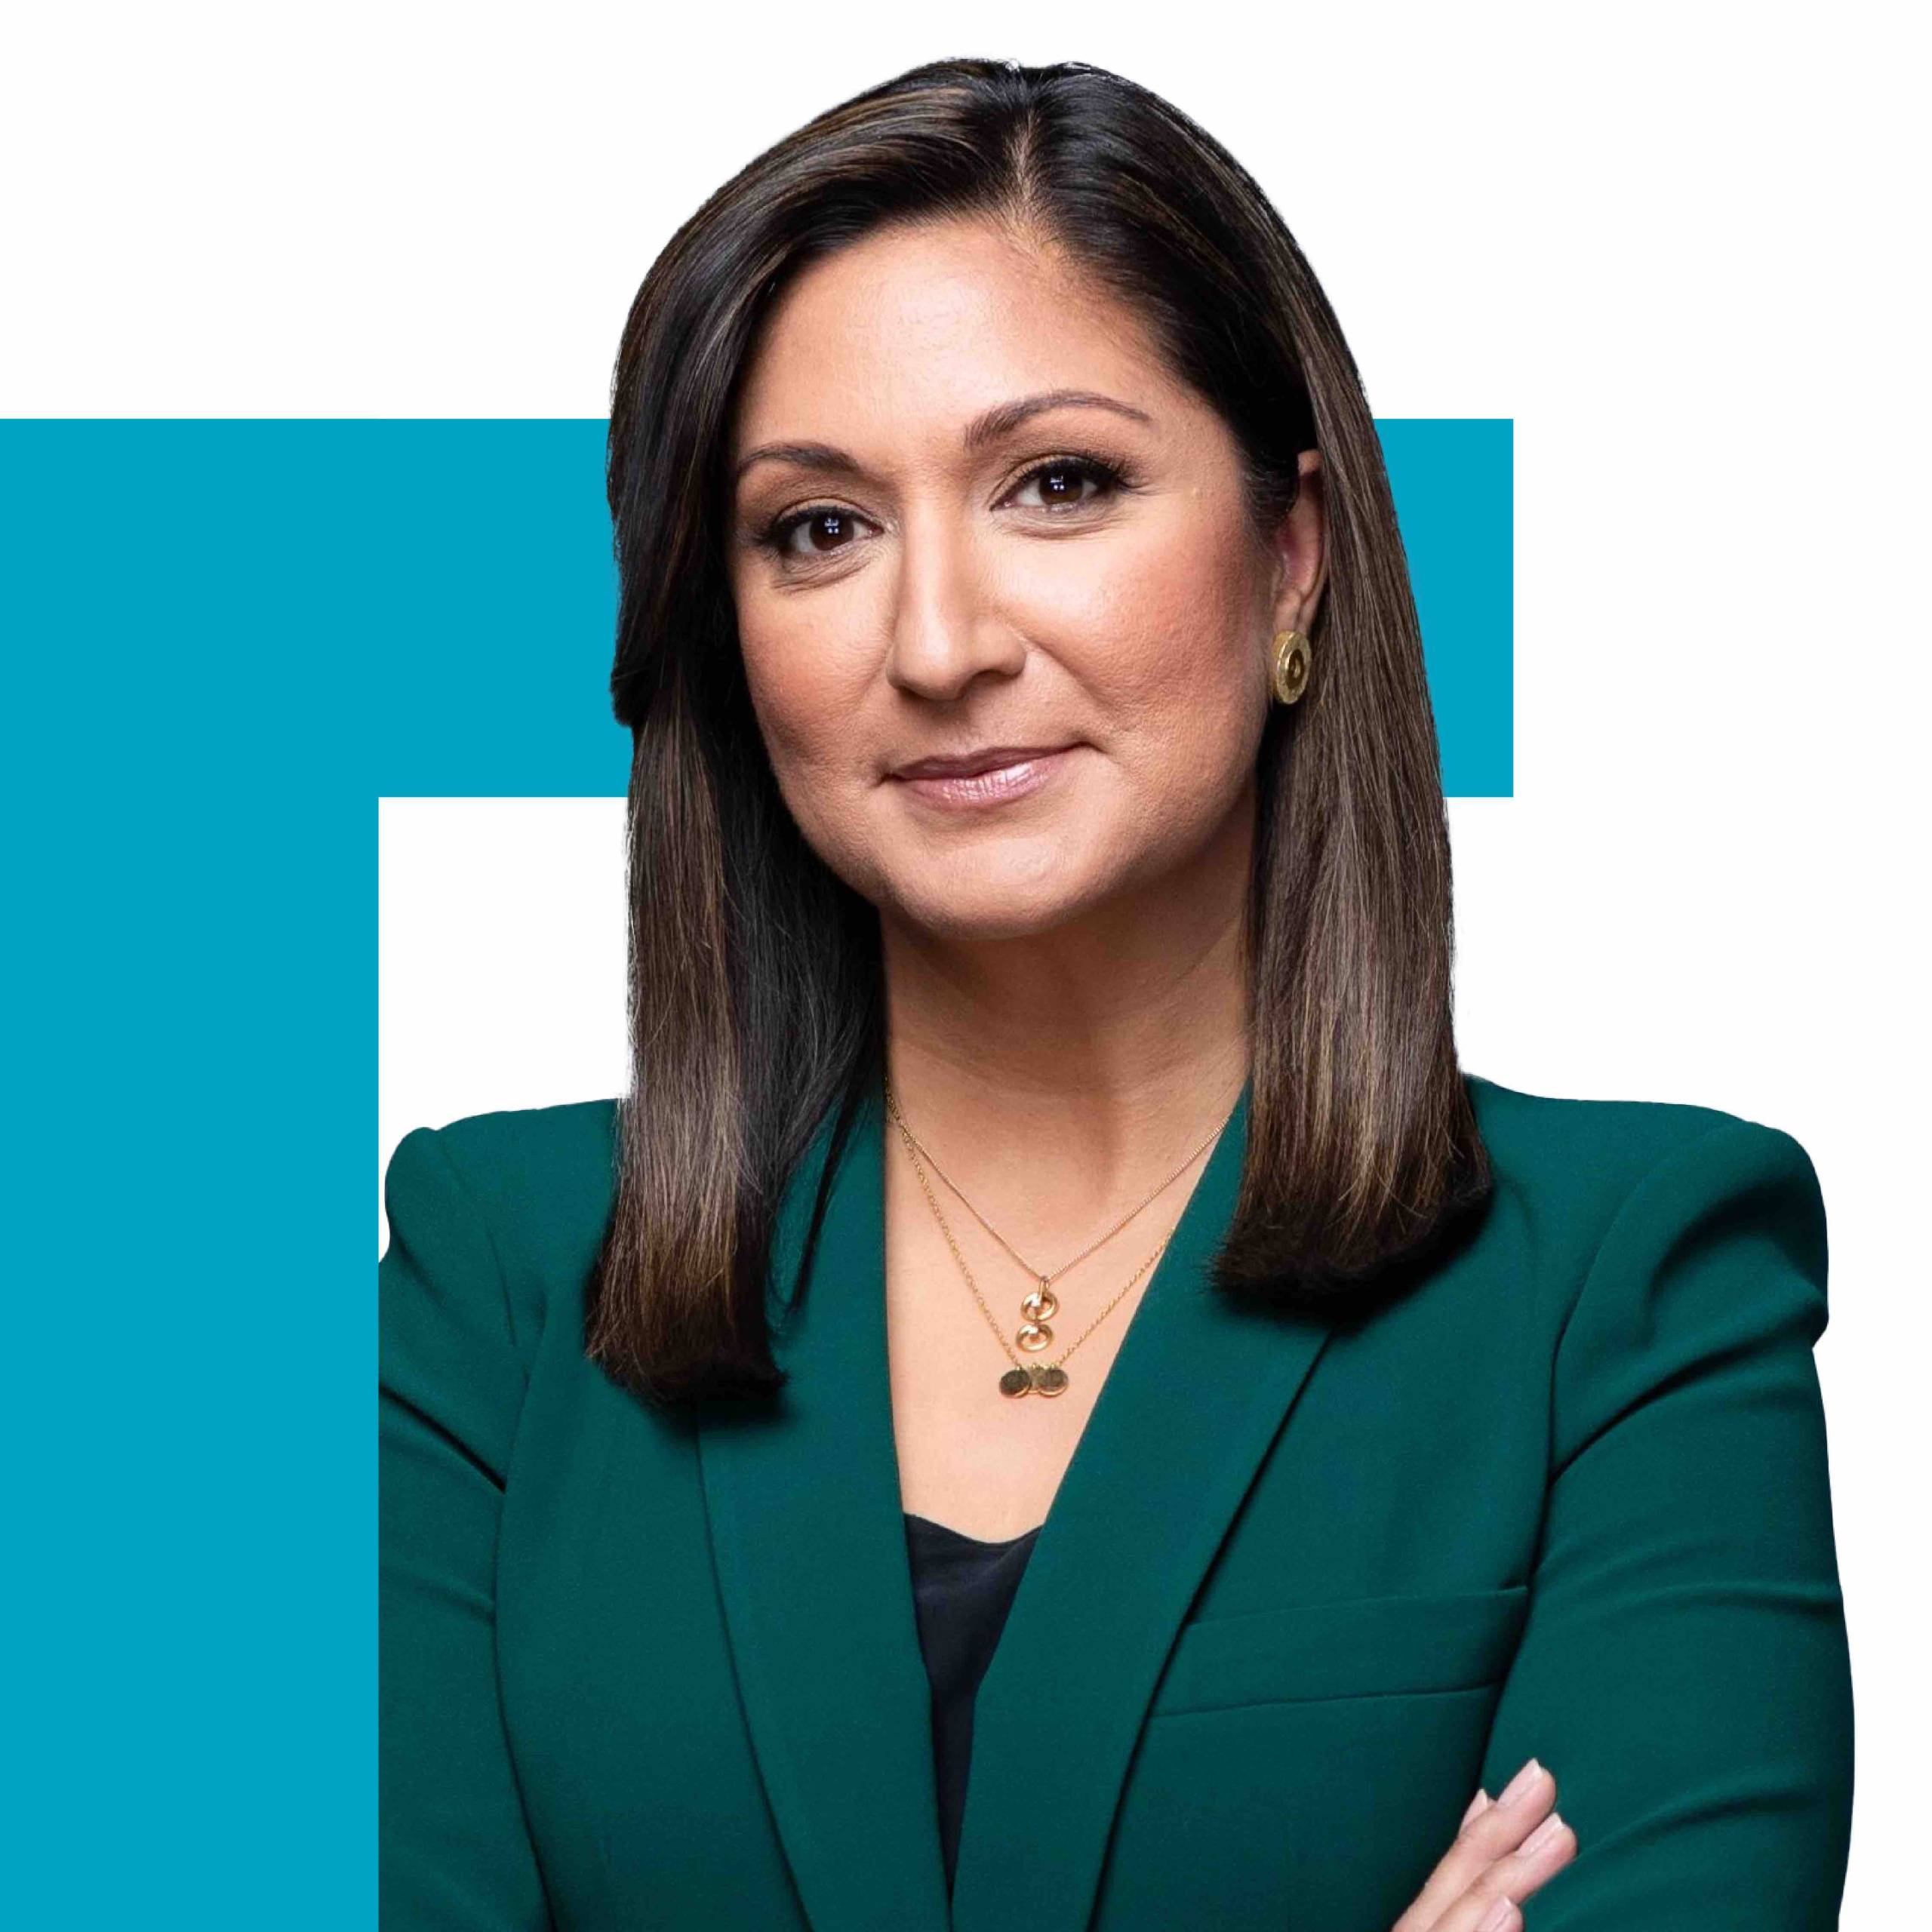 PBS NewsHour co-anchor Amna Nawaz, a woman with dark hair in a green blazer, is framed by a blue right-angle graphic over her upper left shoulder.